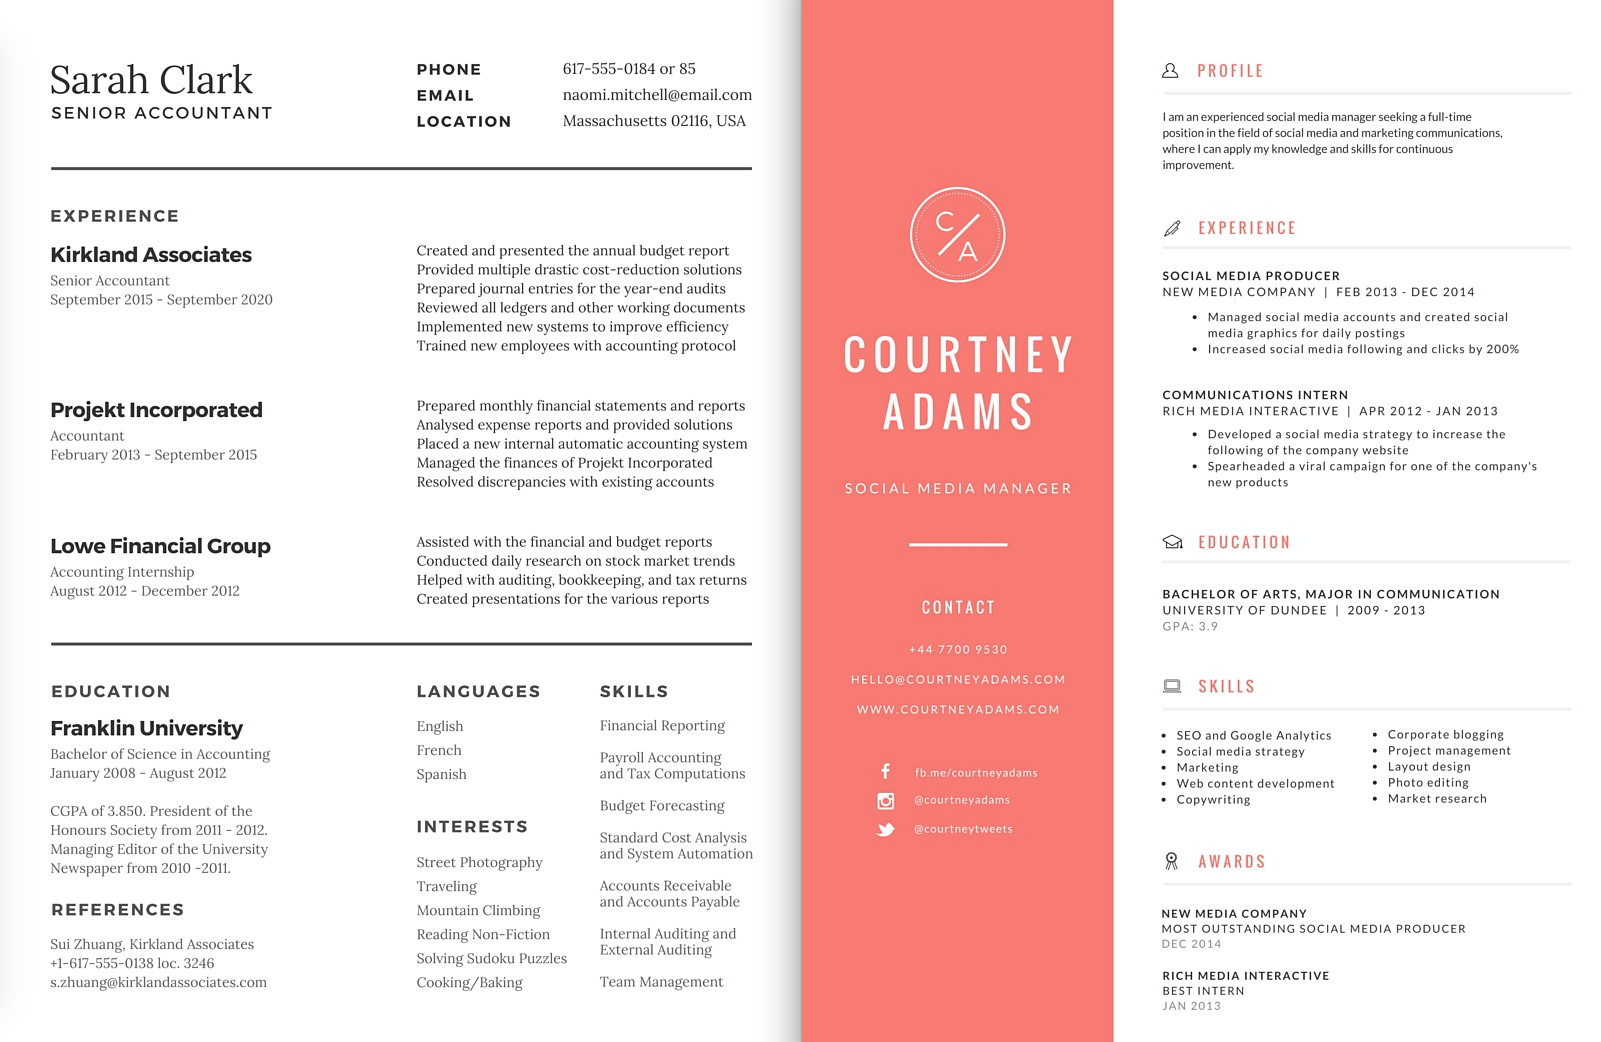 Redesigning Your Resume for 2016